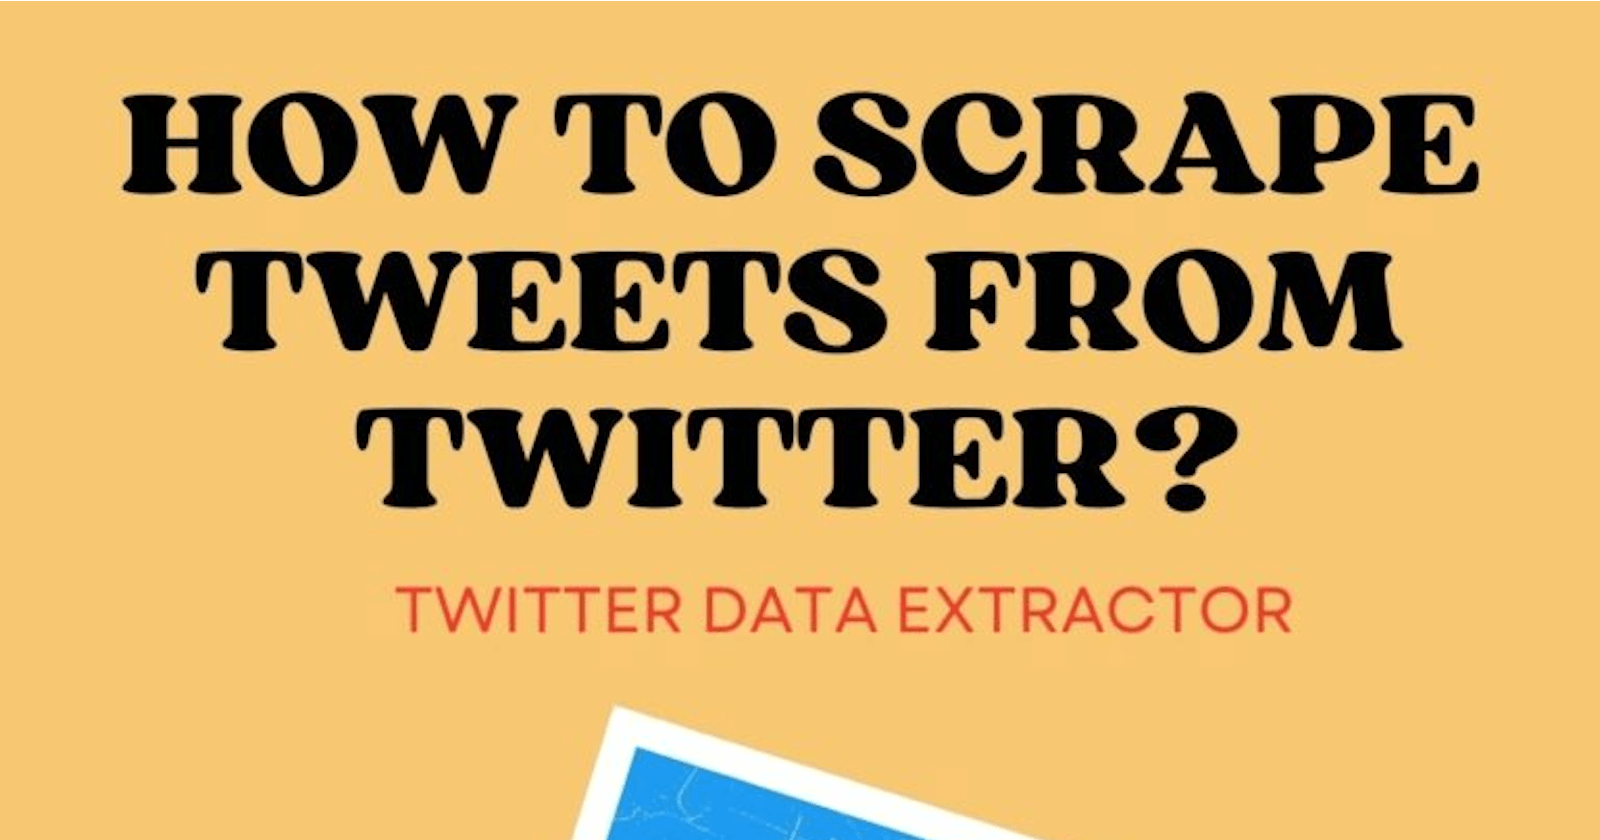 How To Scrape Data From Twitter Accounts?